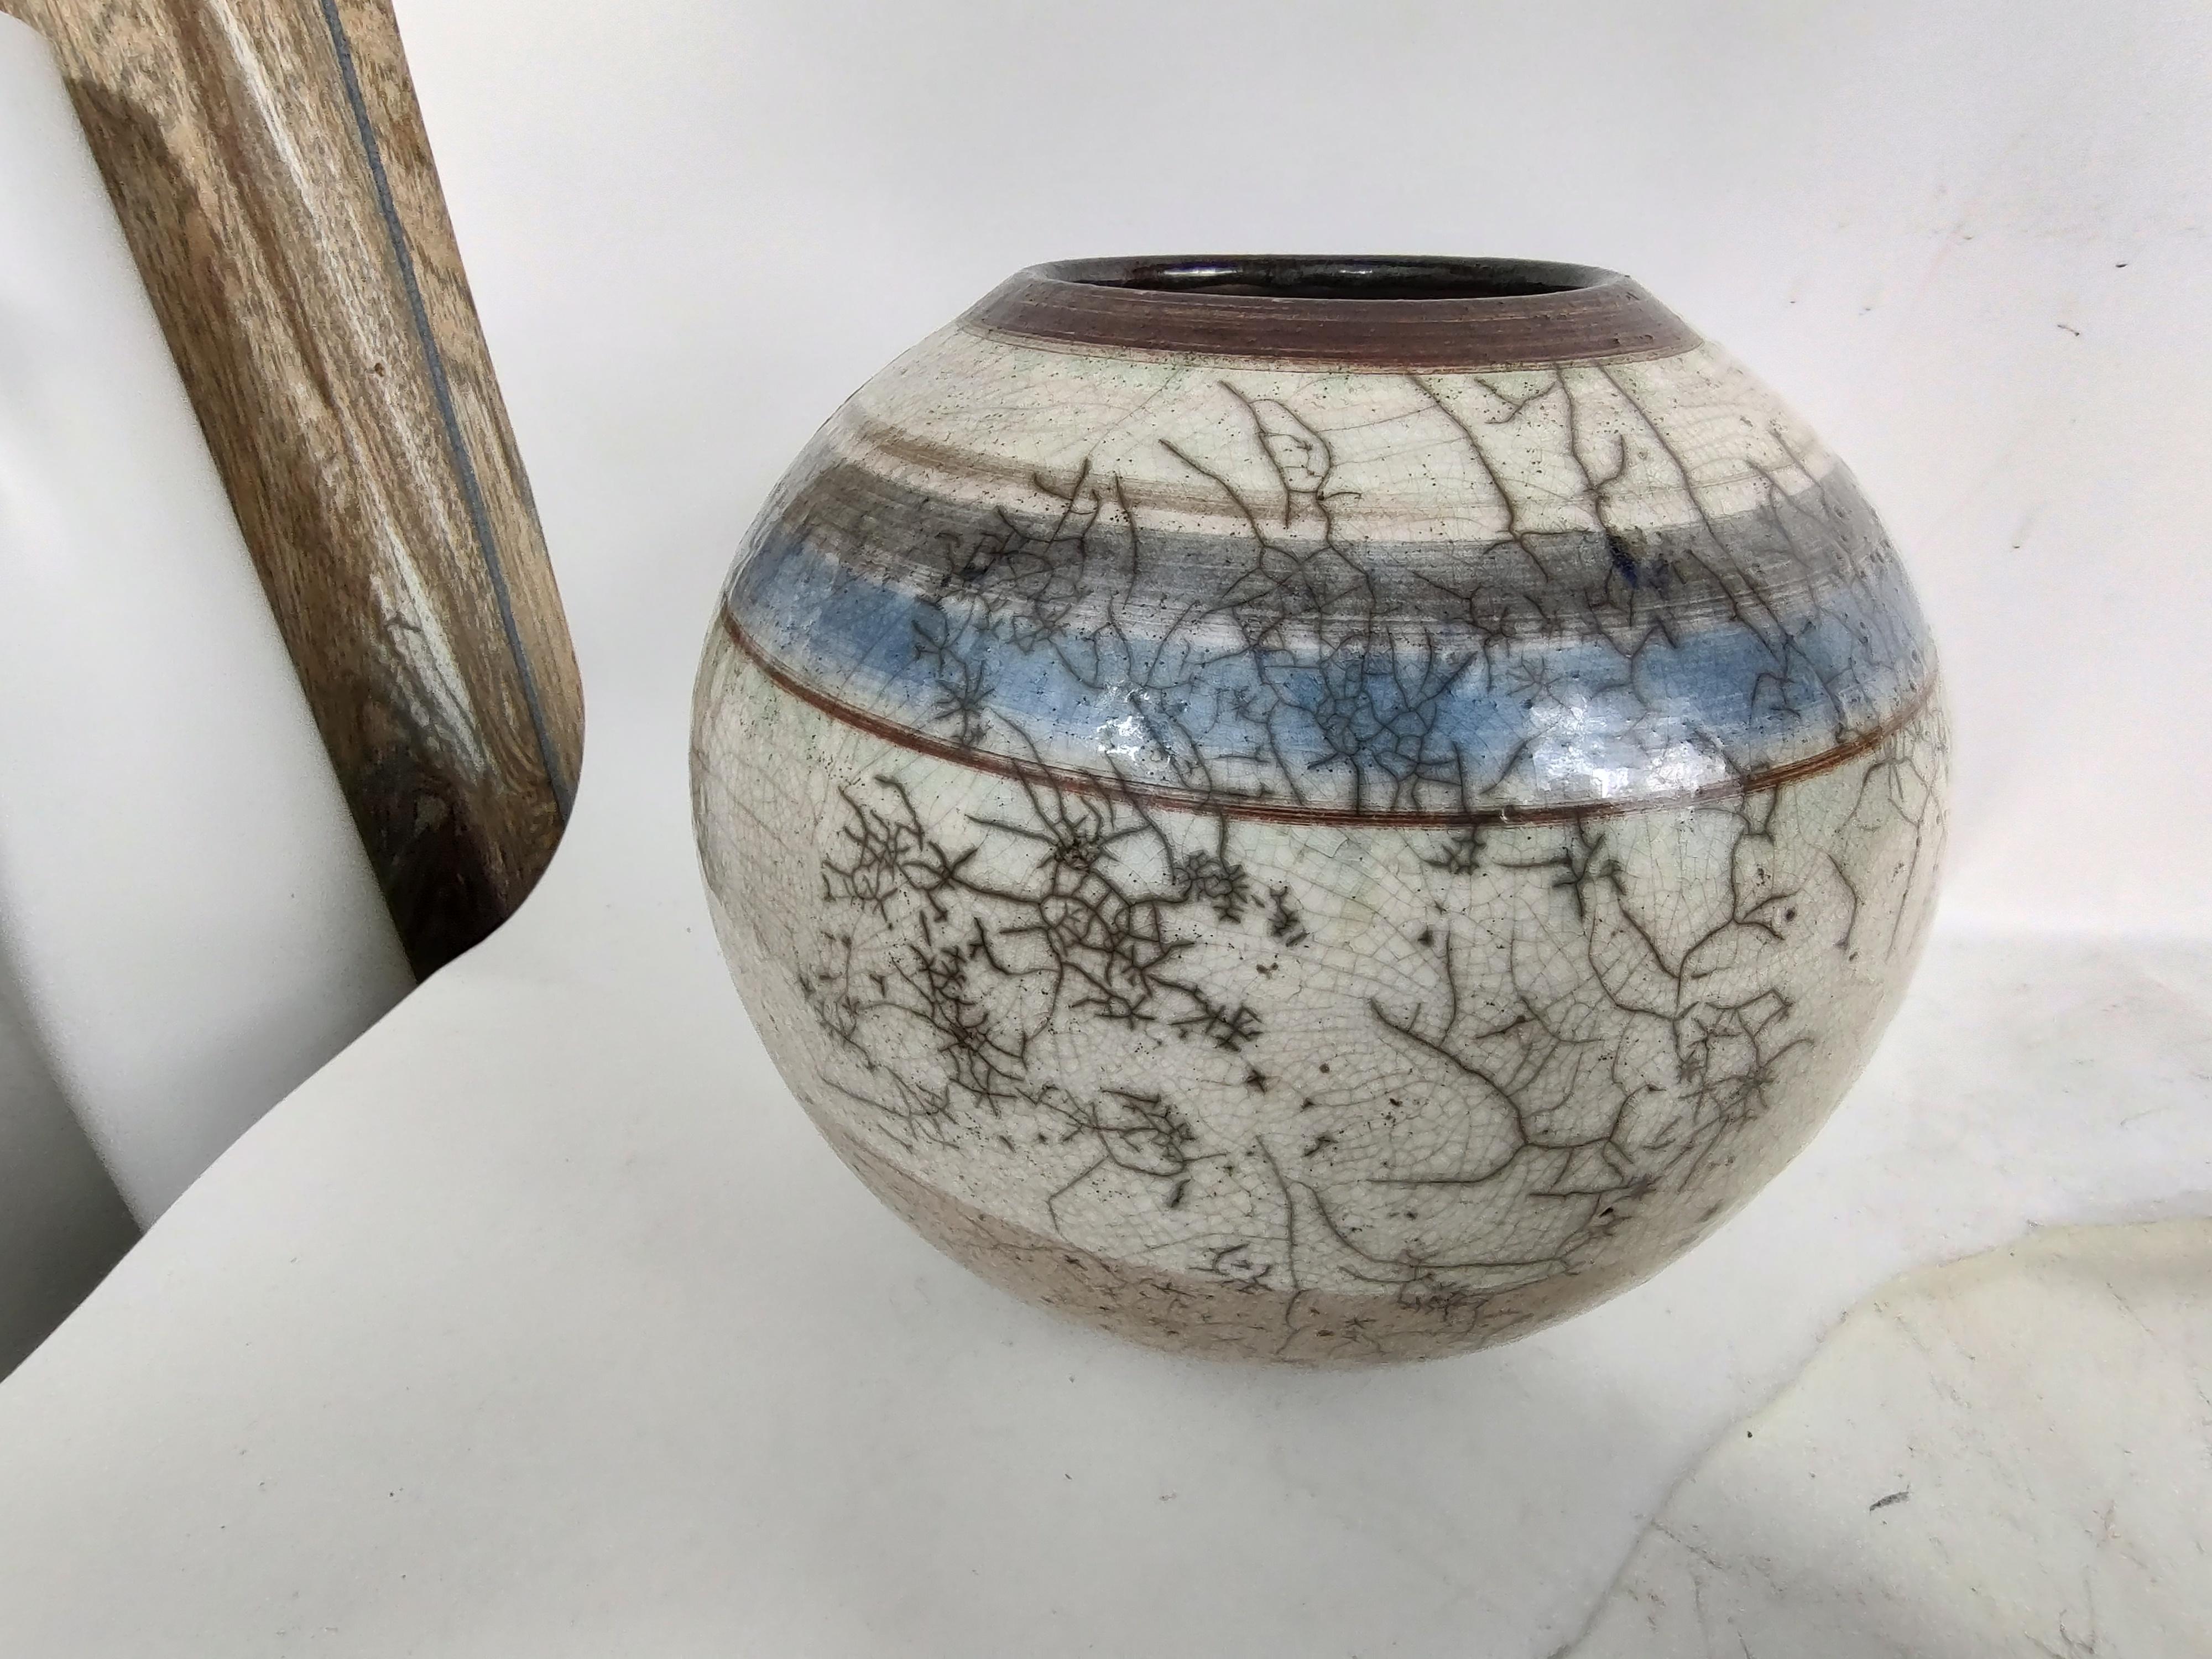 Clay Hand Crafted Mid-Century Modern Vase, Pot by Artist Nancee Meeker For Sale